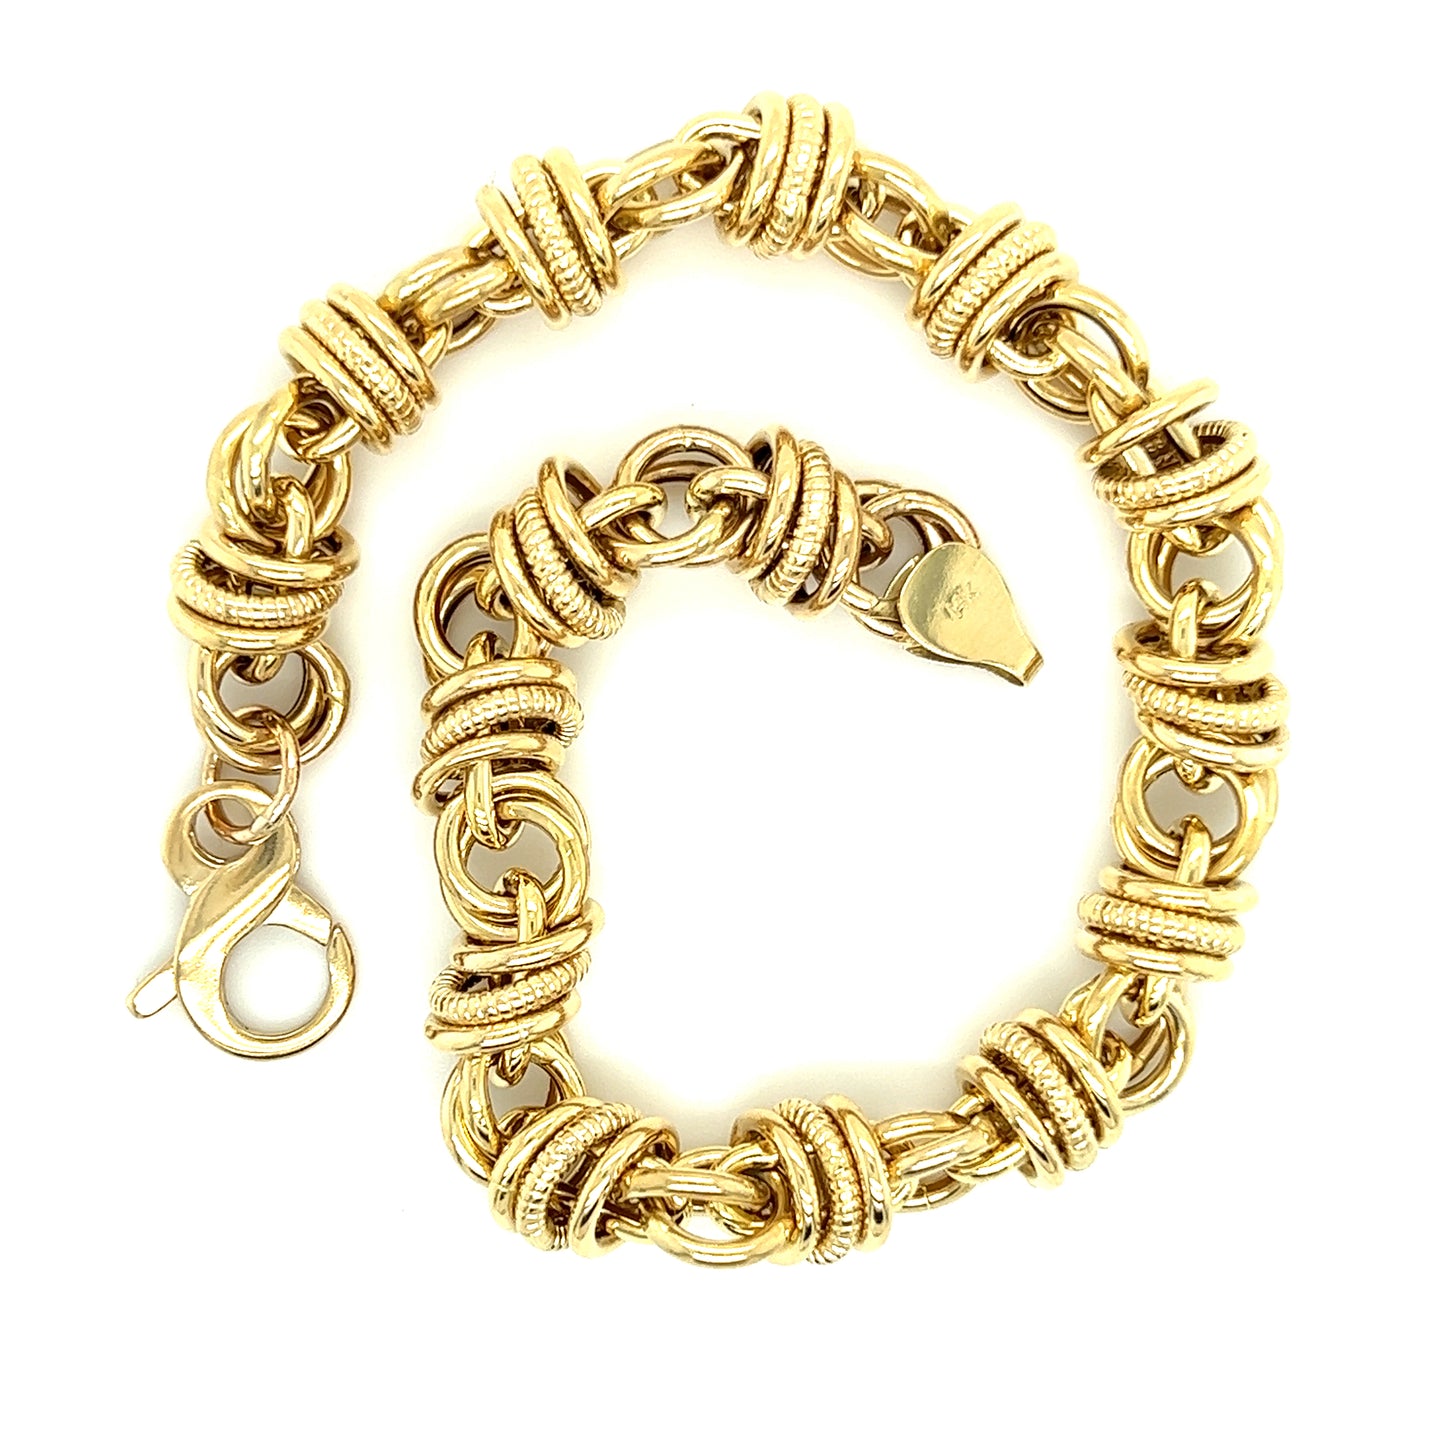 Double Link Bracelet with Loose Rings in 14K Yellow Gold Open Clasp Top View